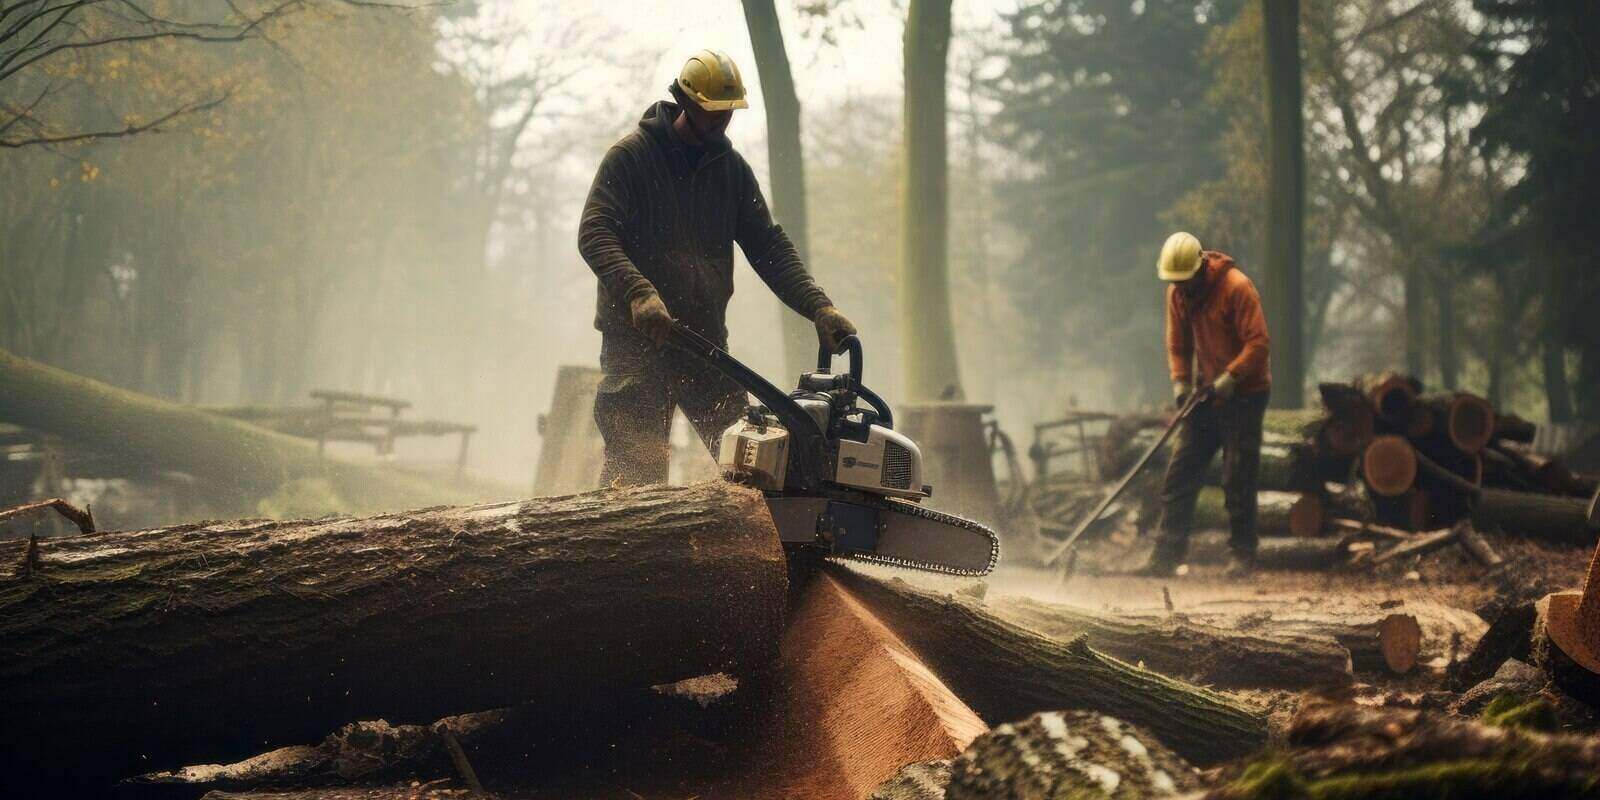 man cutting down trees in the forest